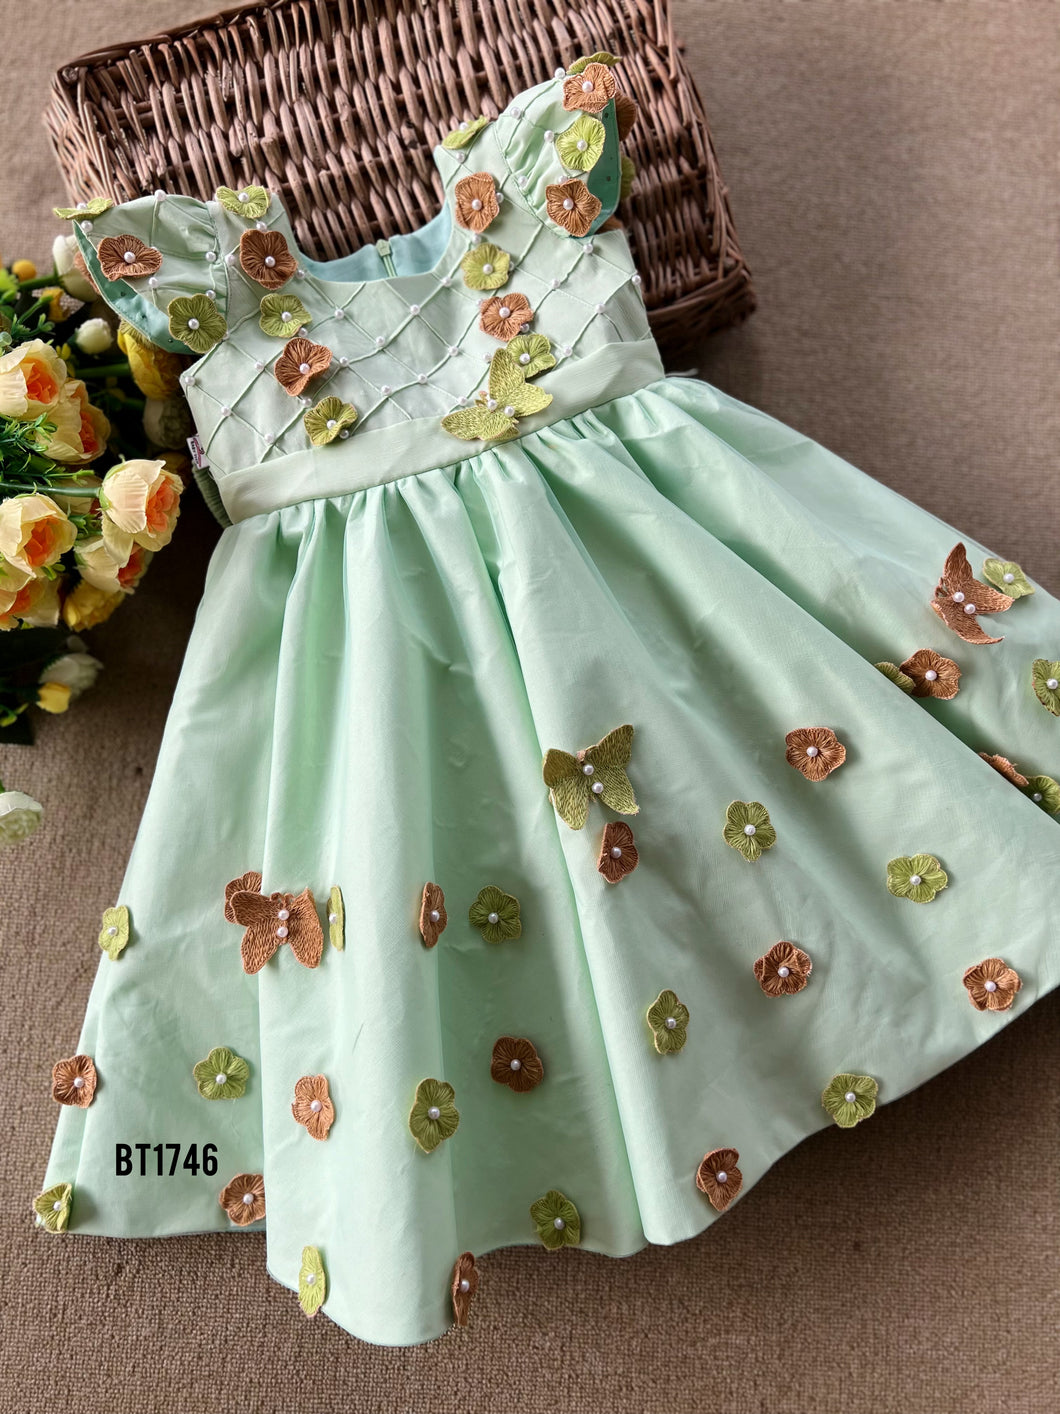 BT1746 Enchanted Garden Party Frock - Whimsical Elegance for Little Ones